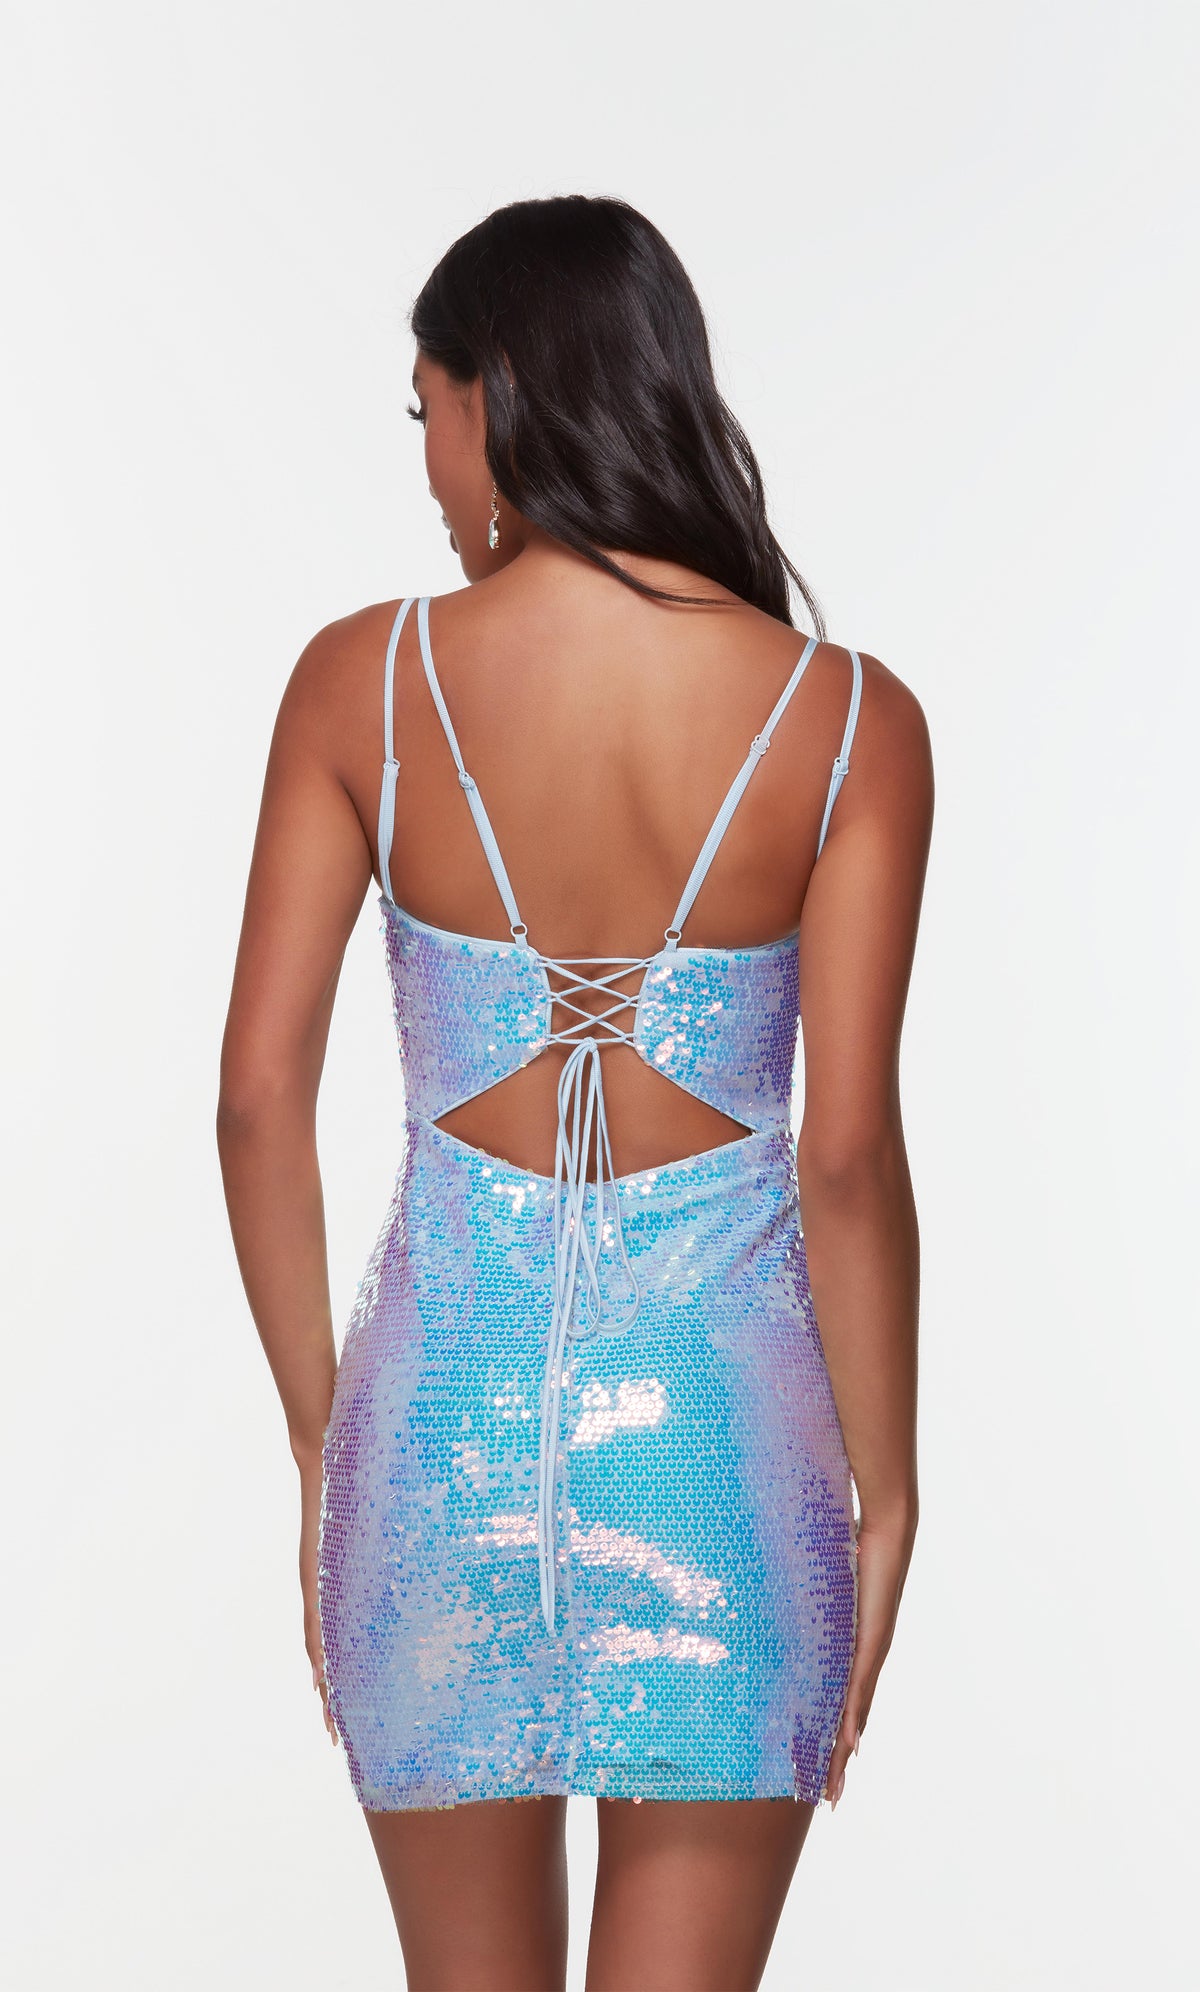 Short iridescent sequin pageant dress with a strappy back.